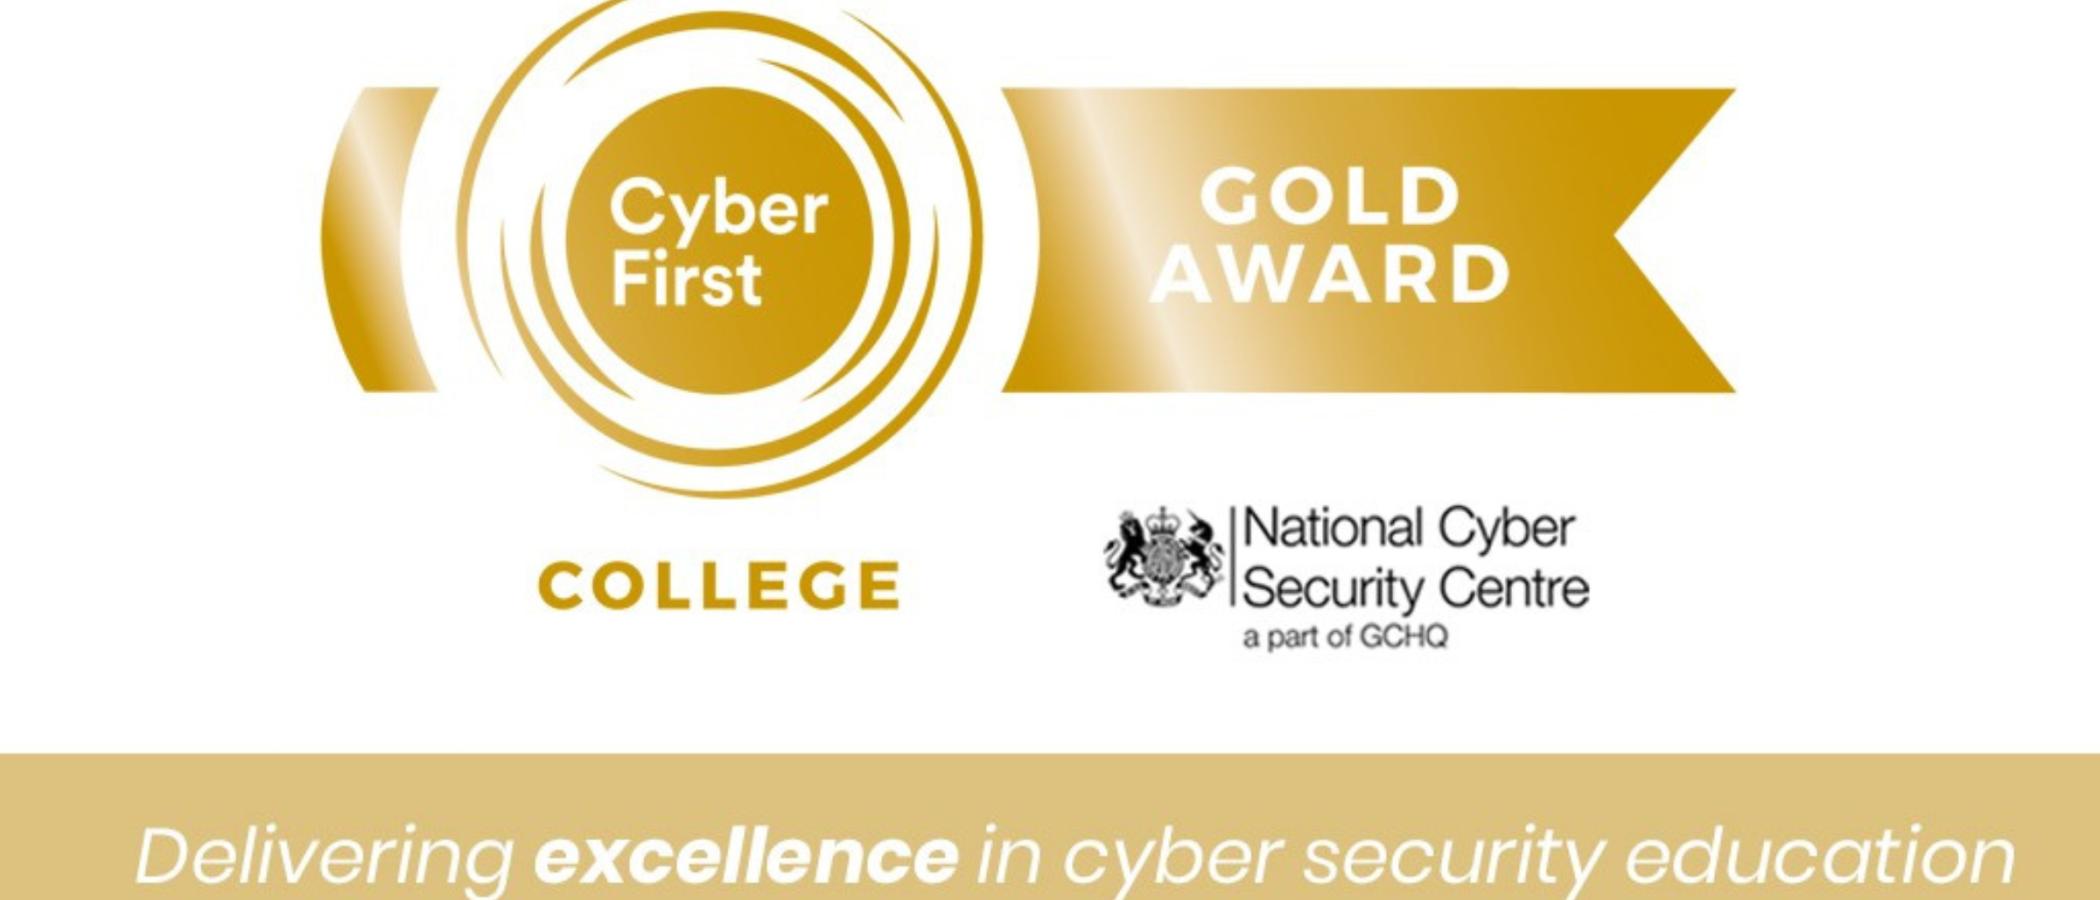 A graphical image issued by the National Cyber Security Centre, announcing that Gower College Swansea has been awarded the CyberFirst Gold Award.